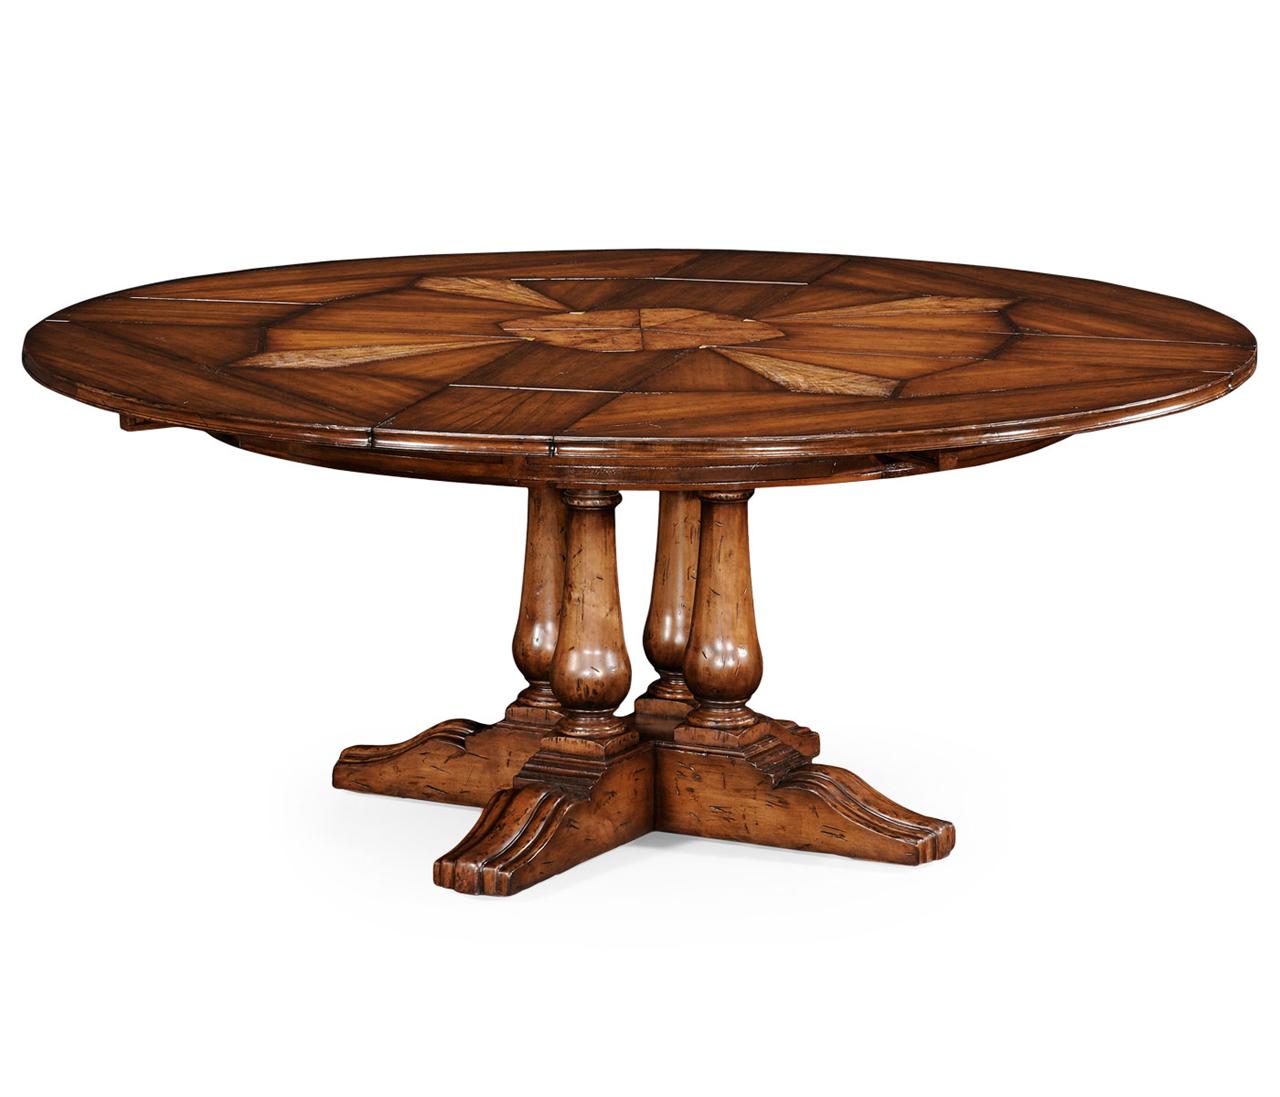 Jupe Table for Sale with Self Storing Leaves|Round Dining Table